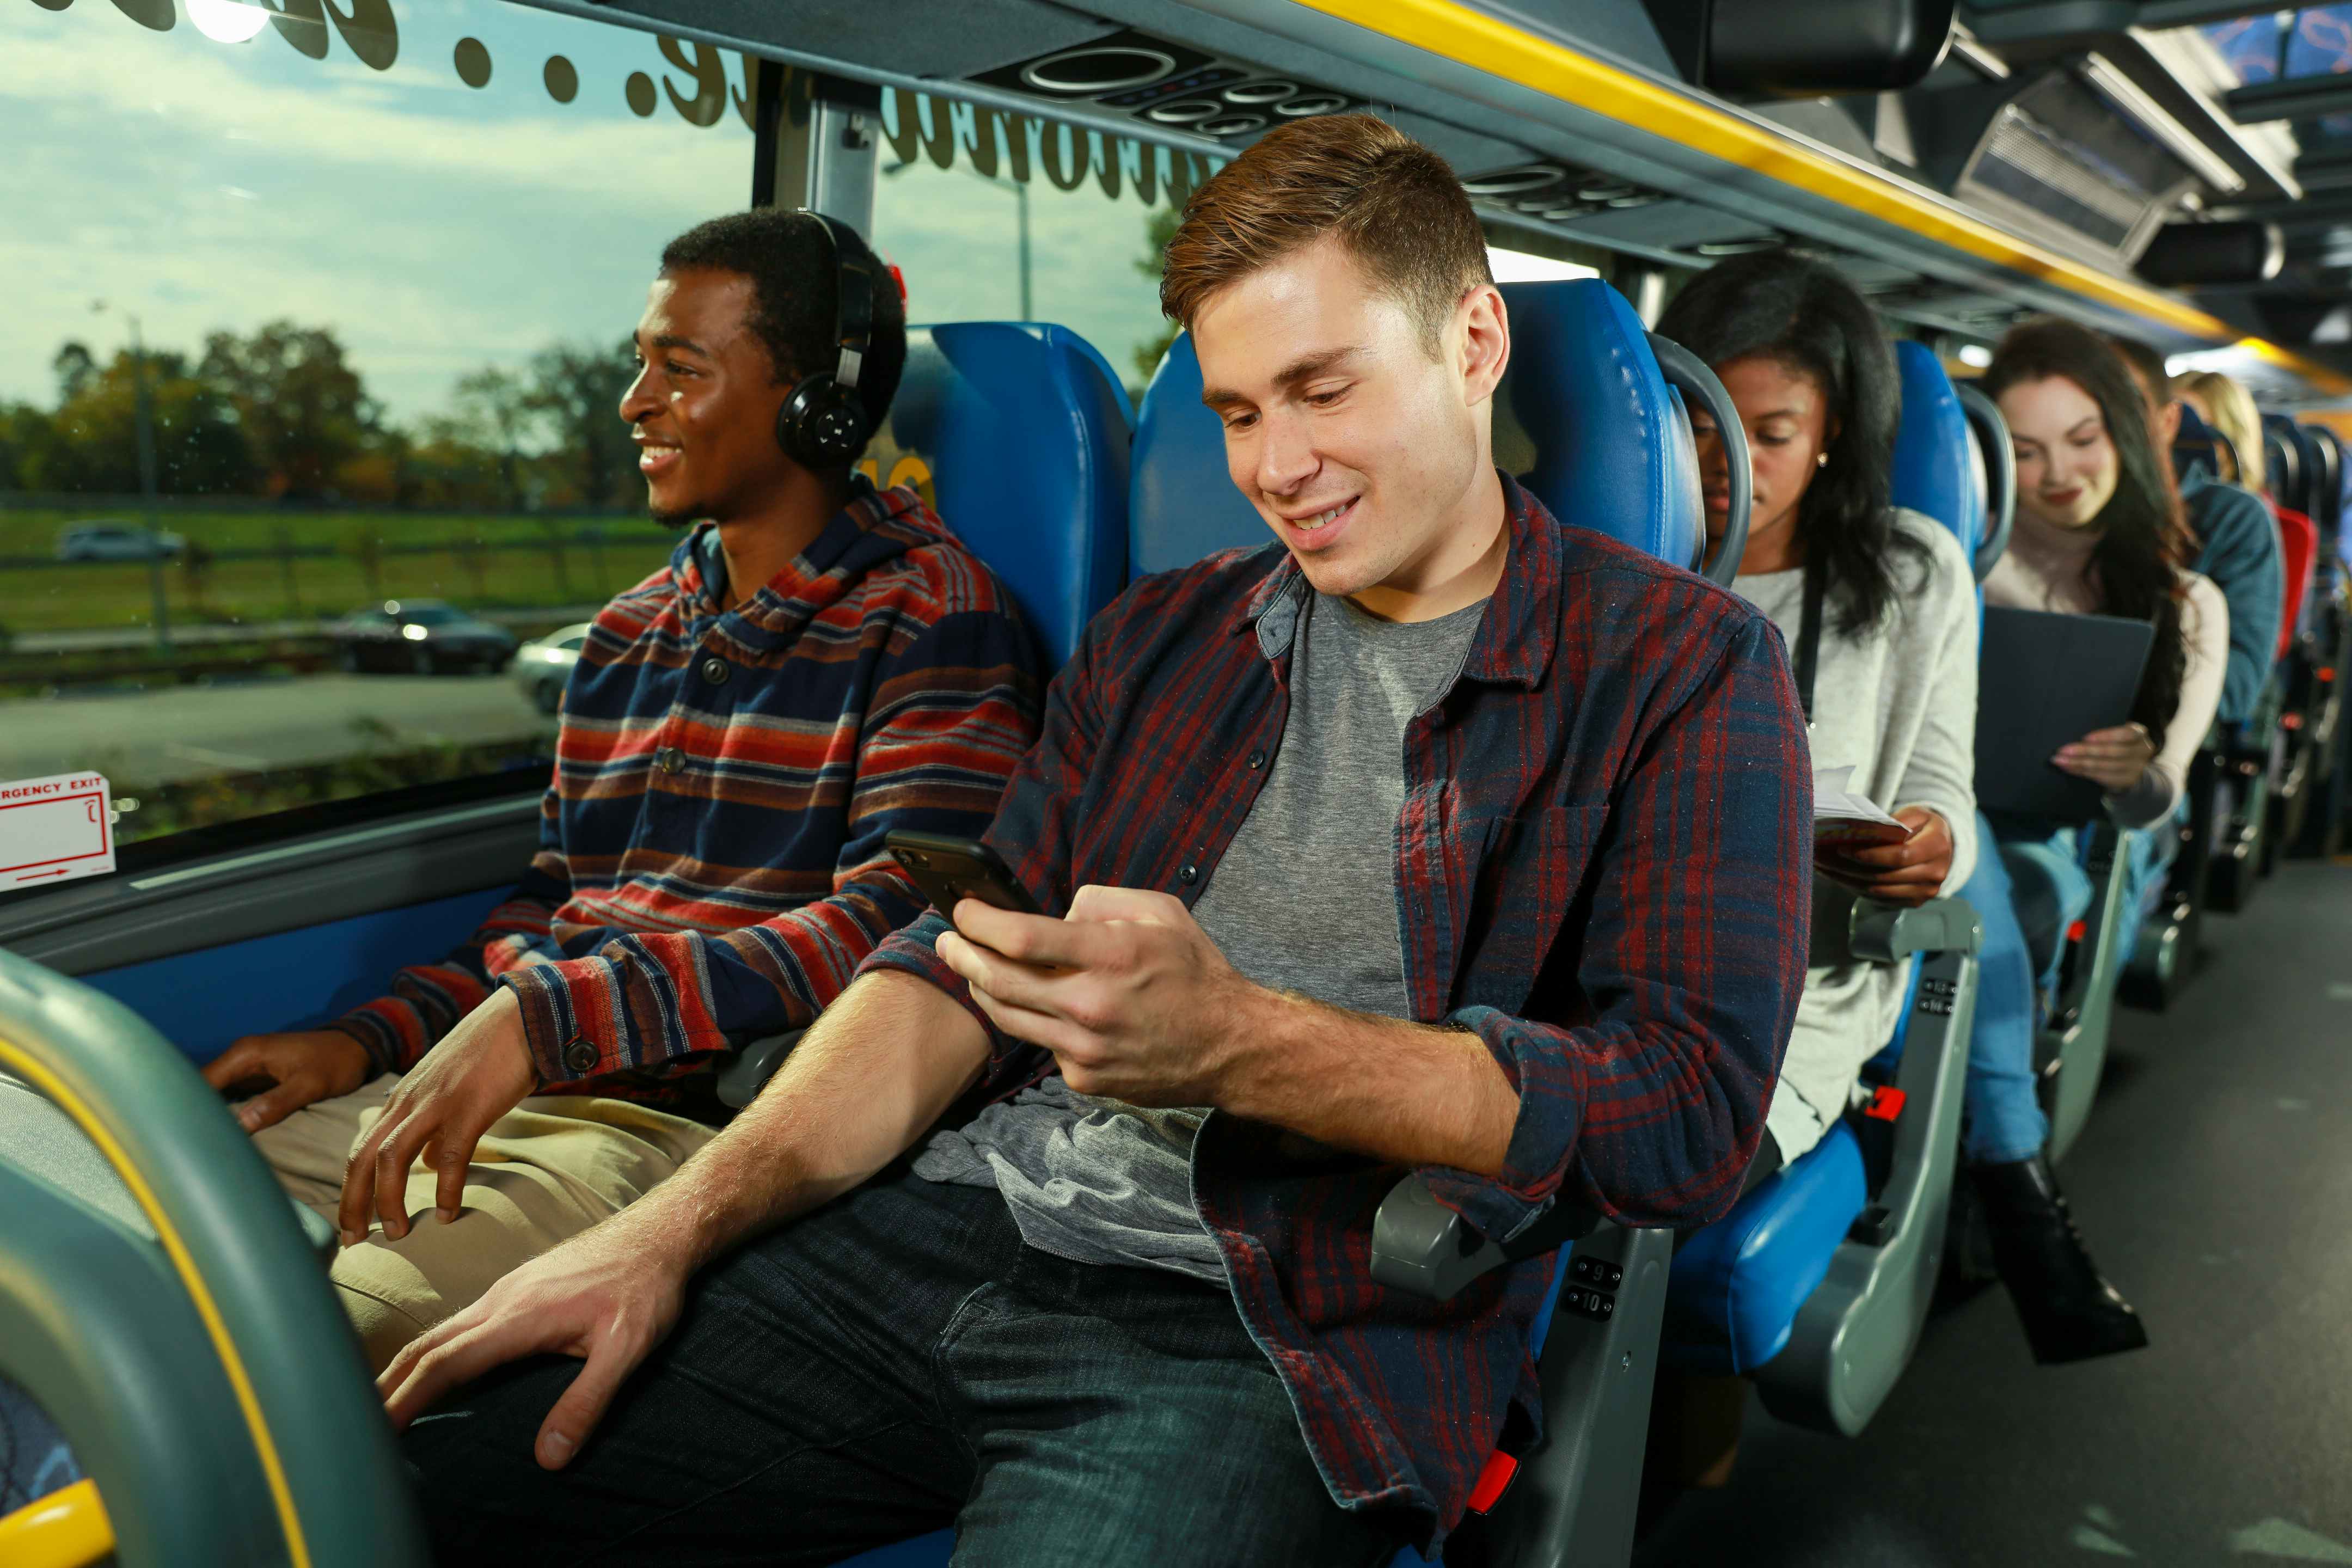 People on their phones and laptops while riding on a Megabus